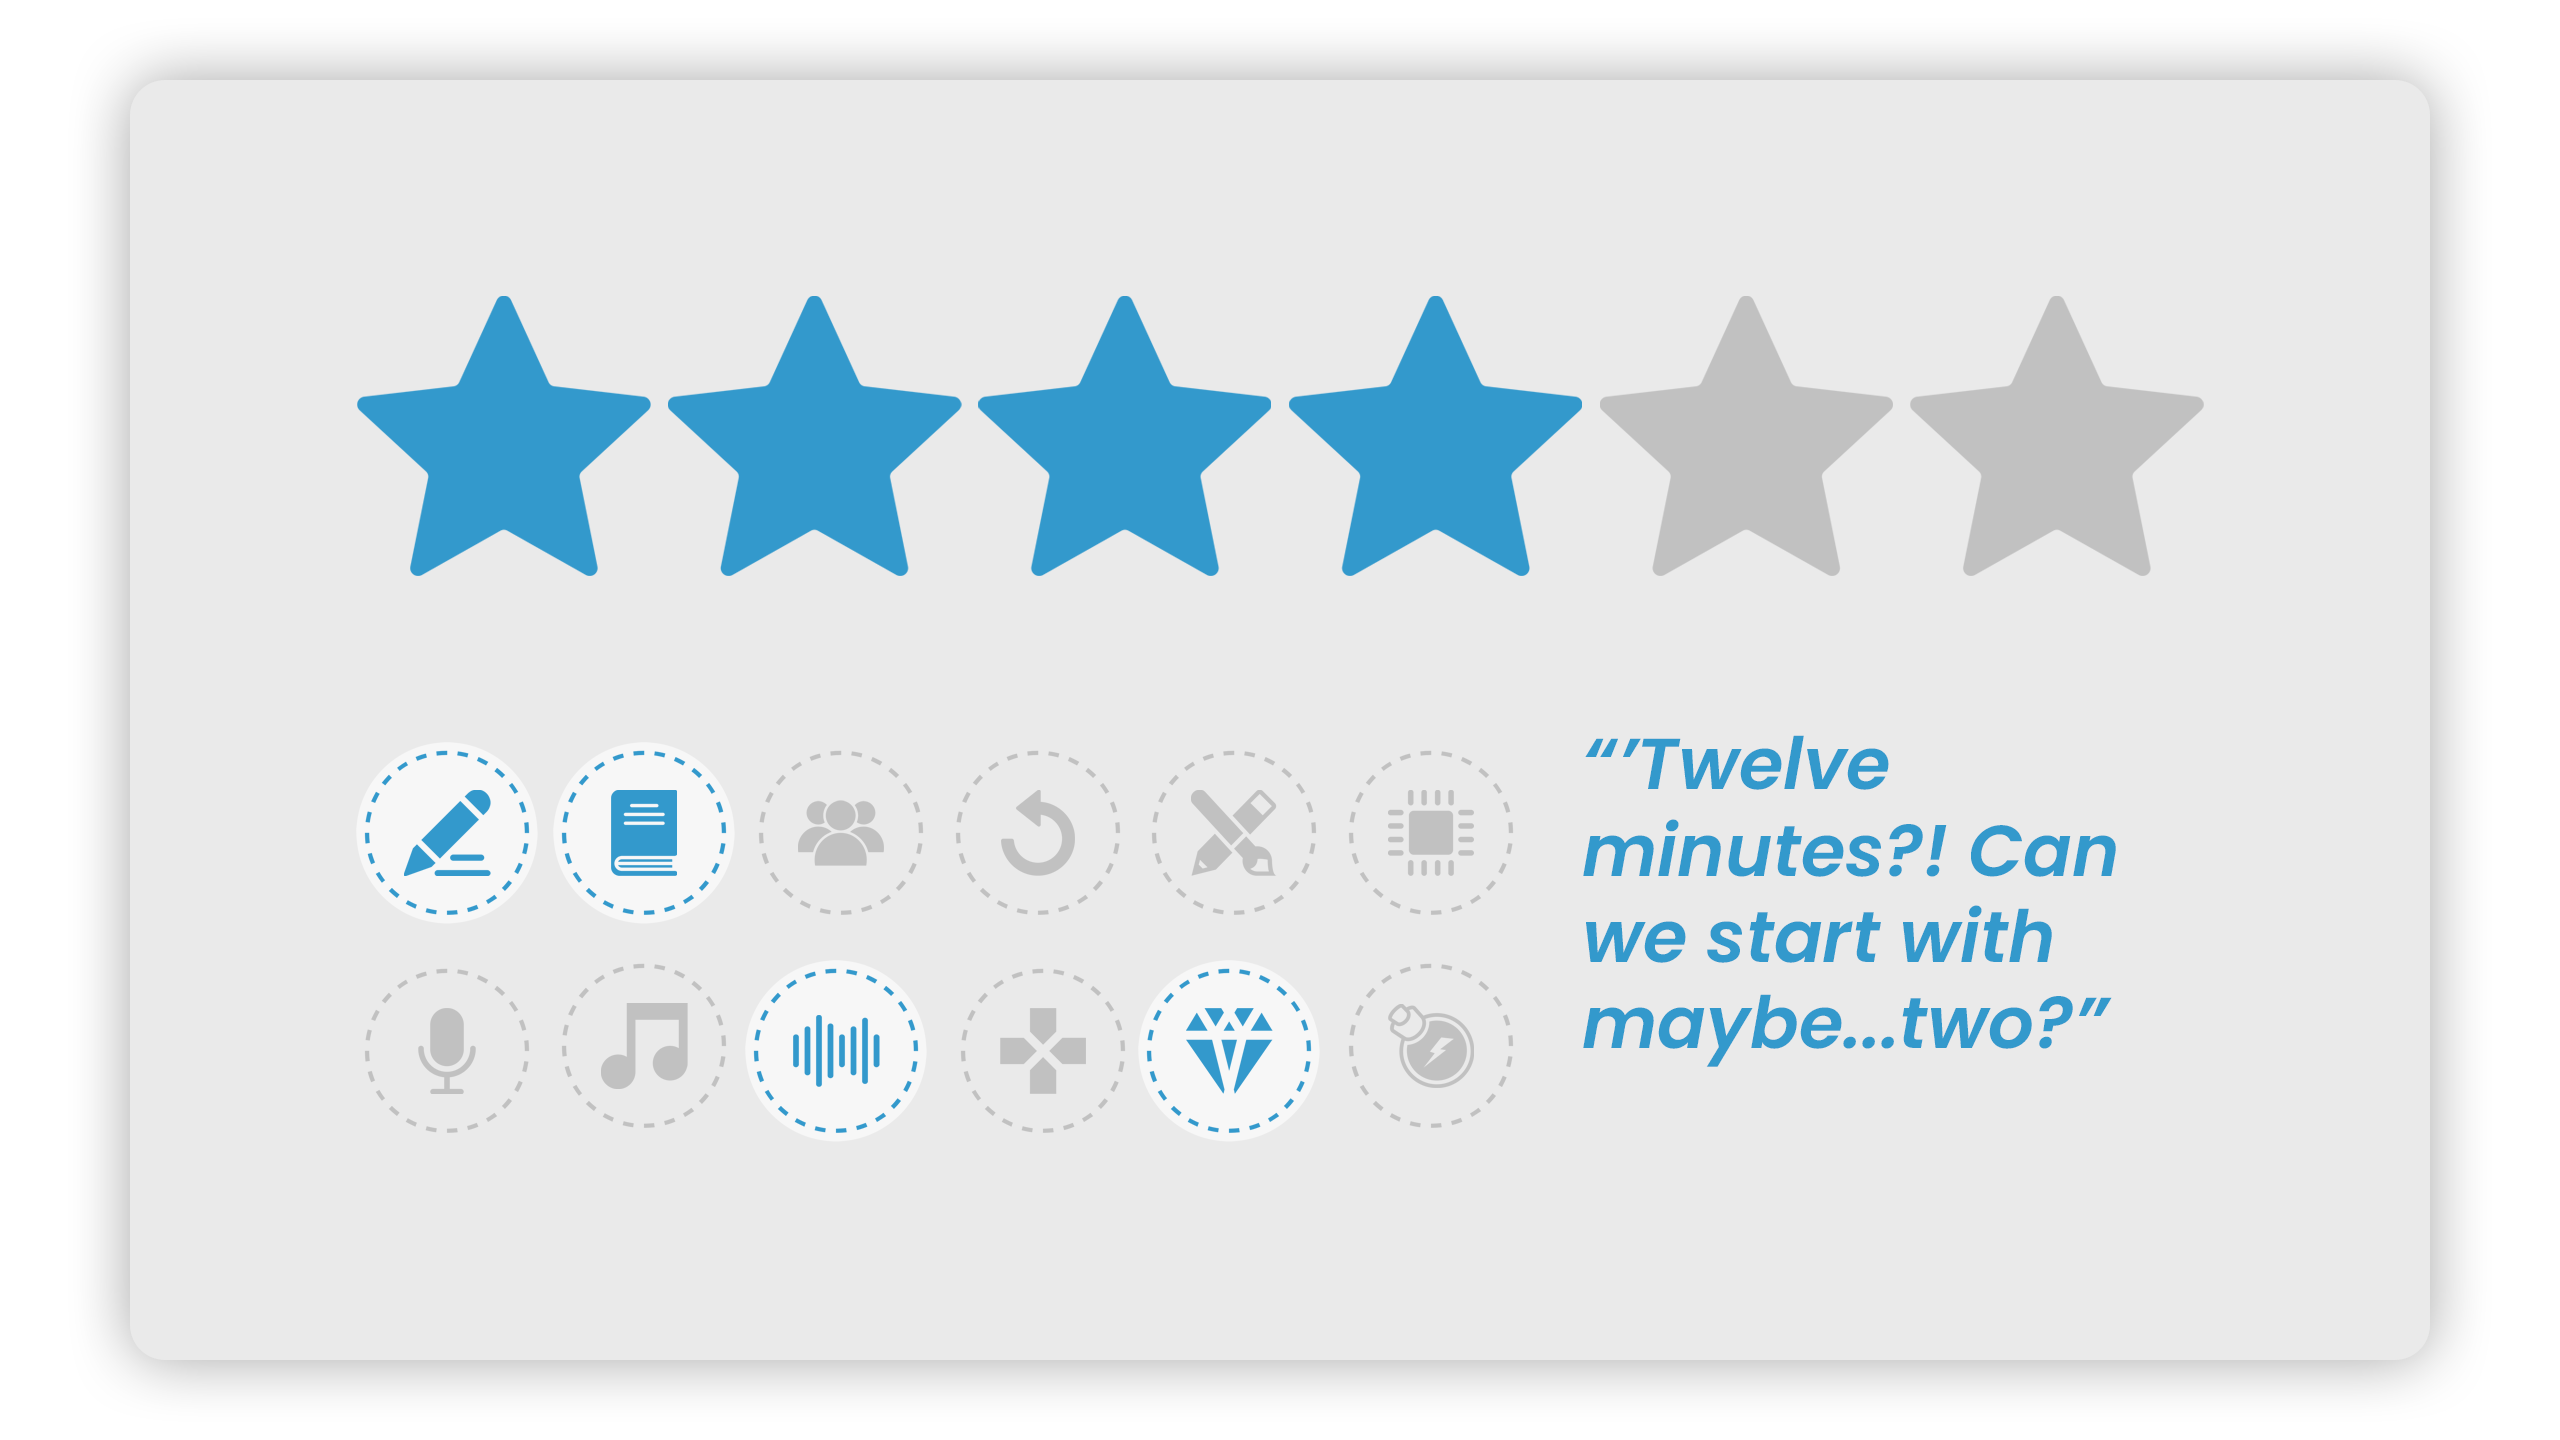 Twelve Minutes Review. Four Stars. Badges for Writing, Story, Sound Design, and Unique.